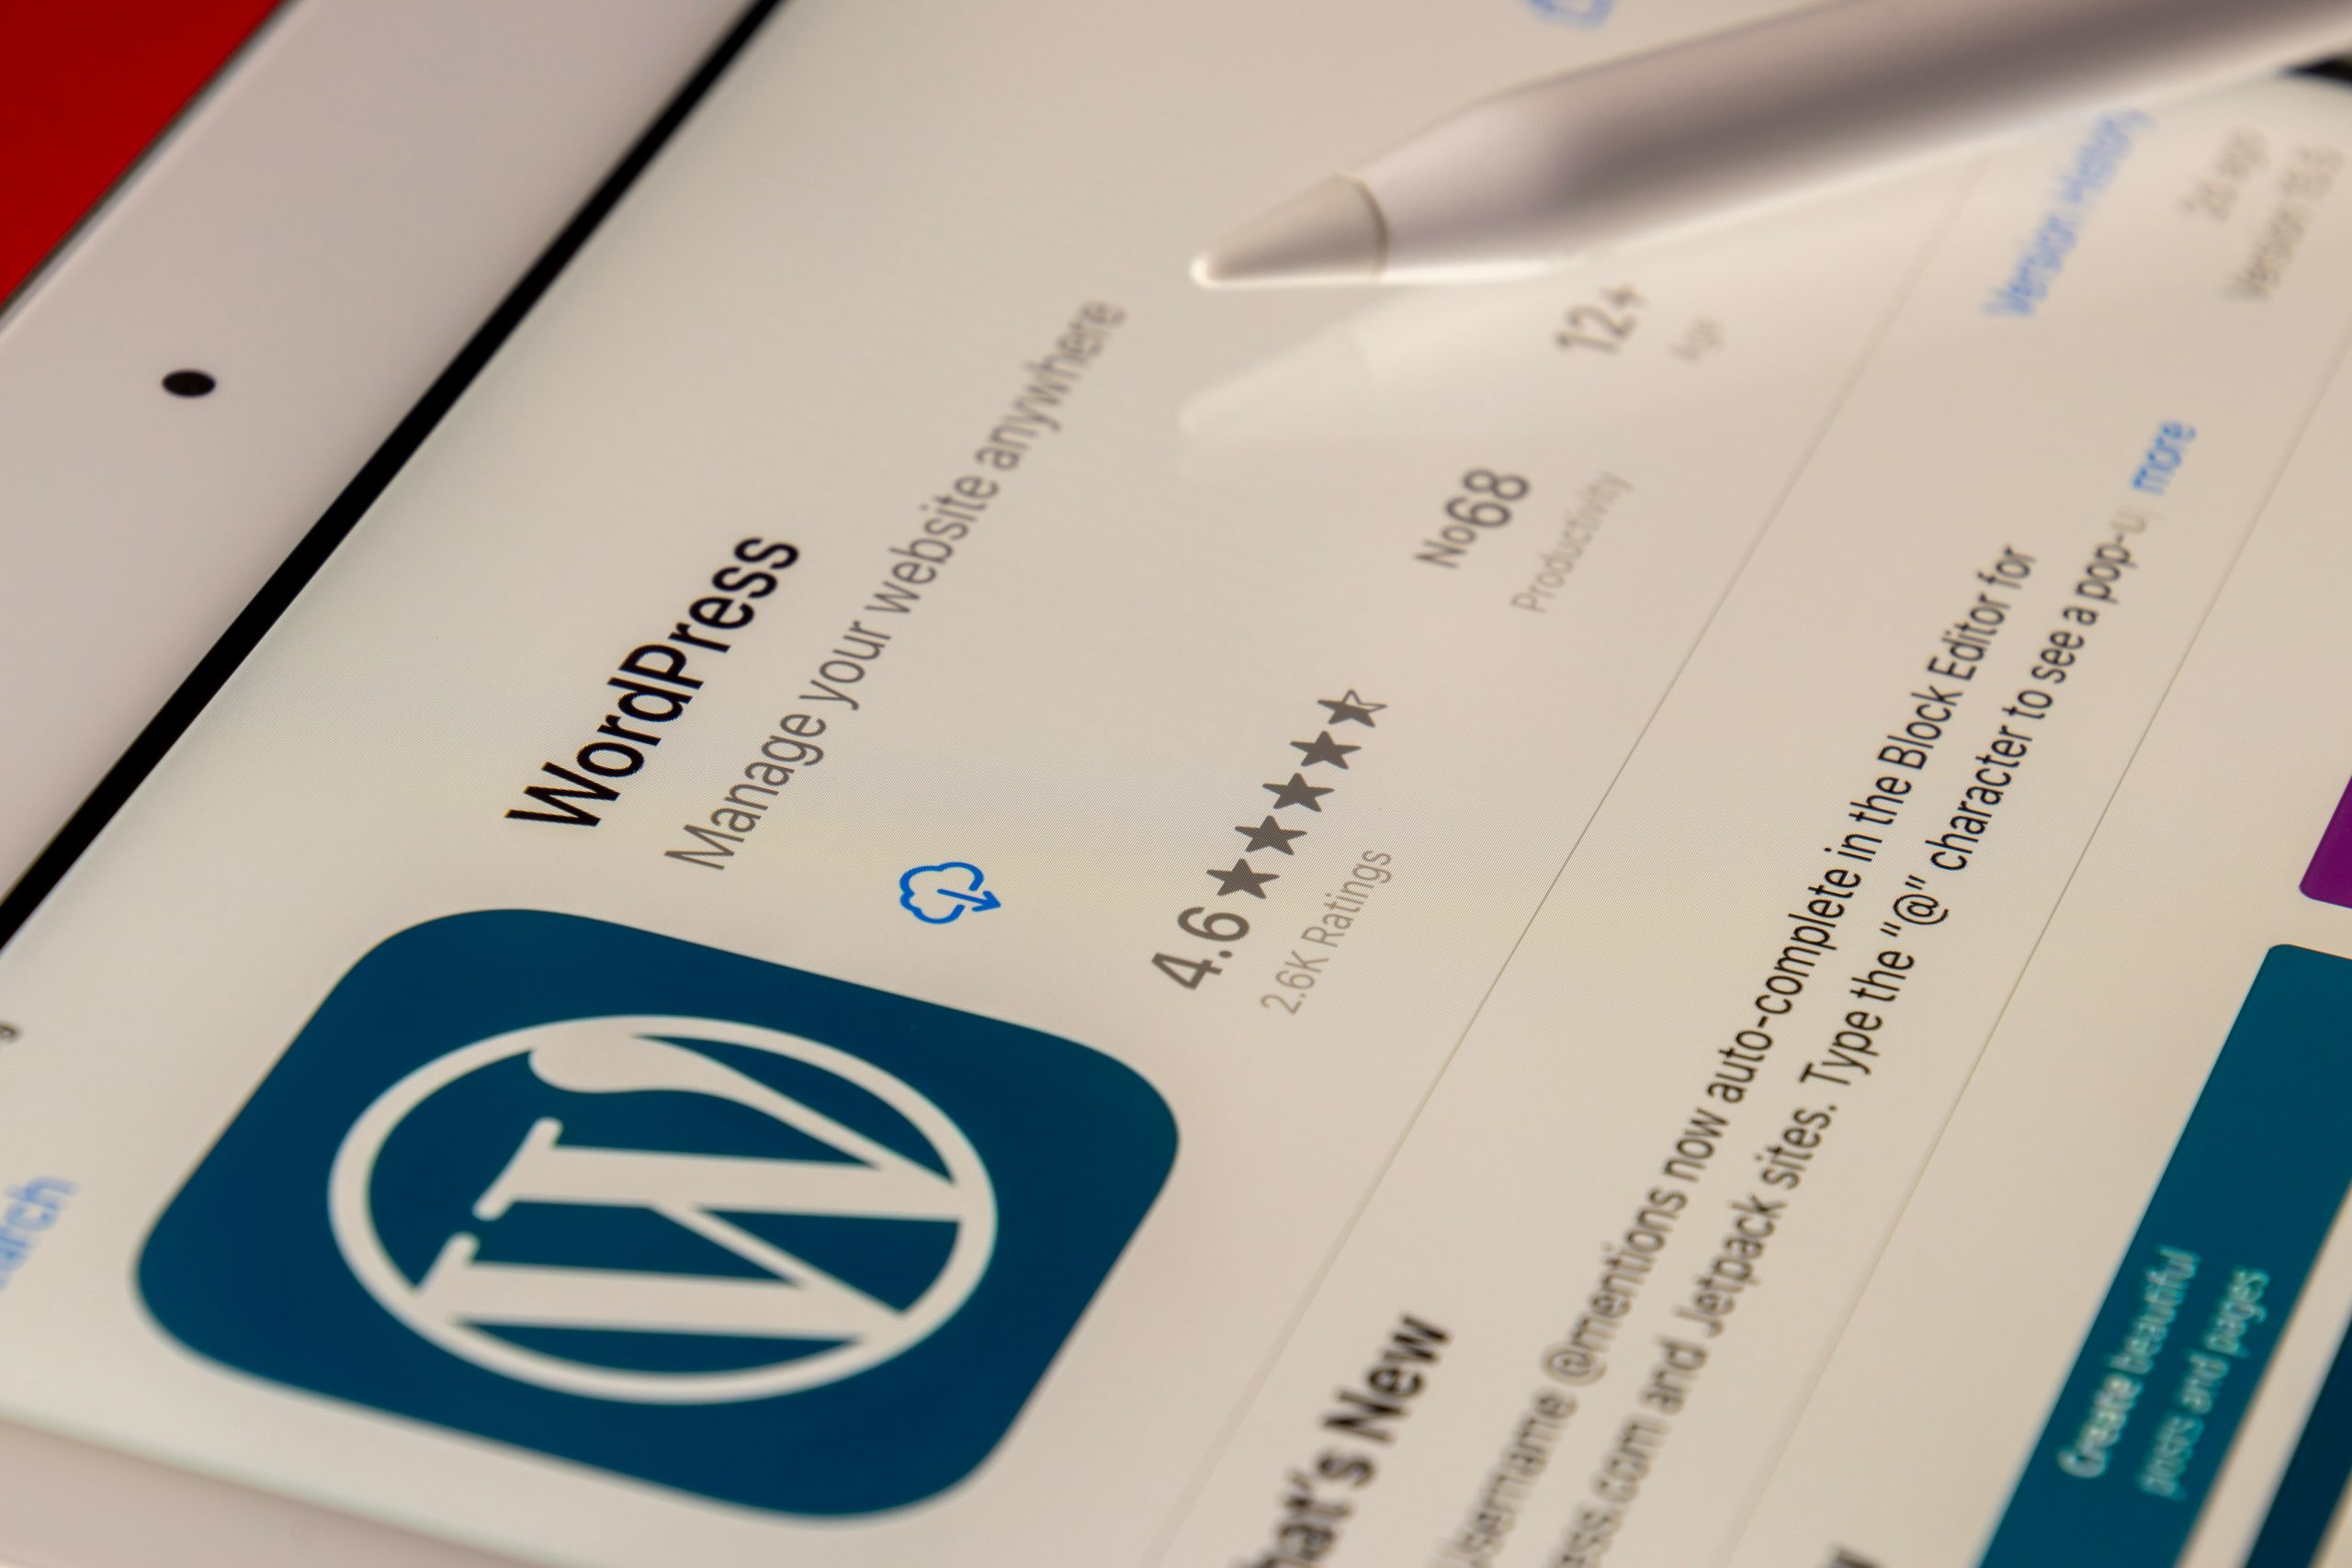 Step 3: How To Use A WordPress Blog